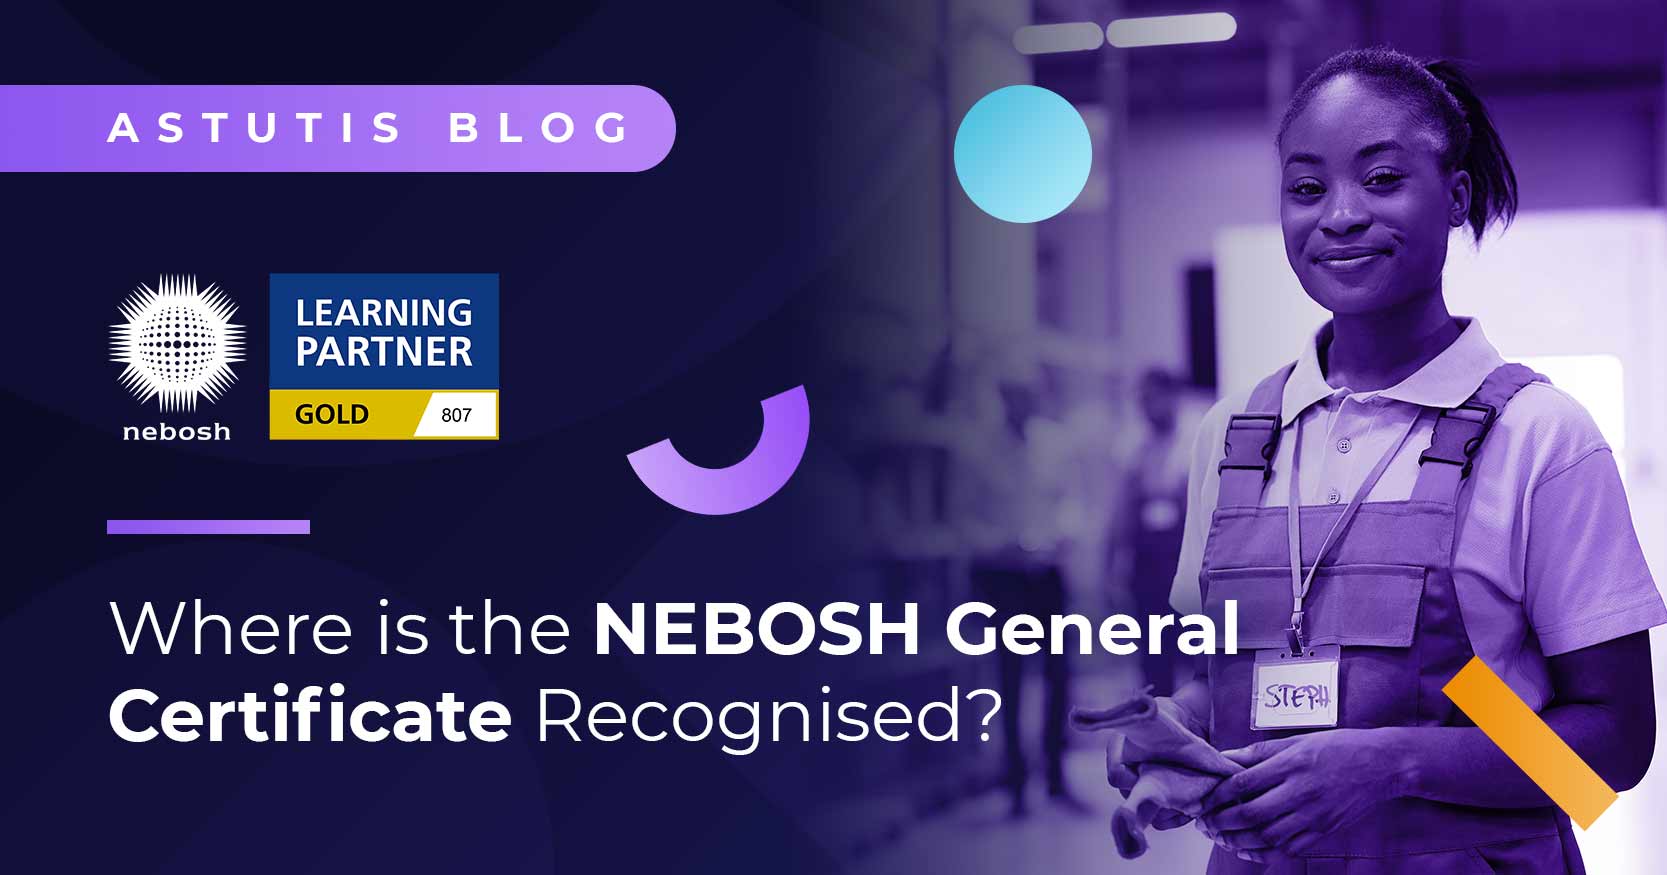 Where is the NEBOSH General Certificate Recognised? Image